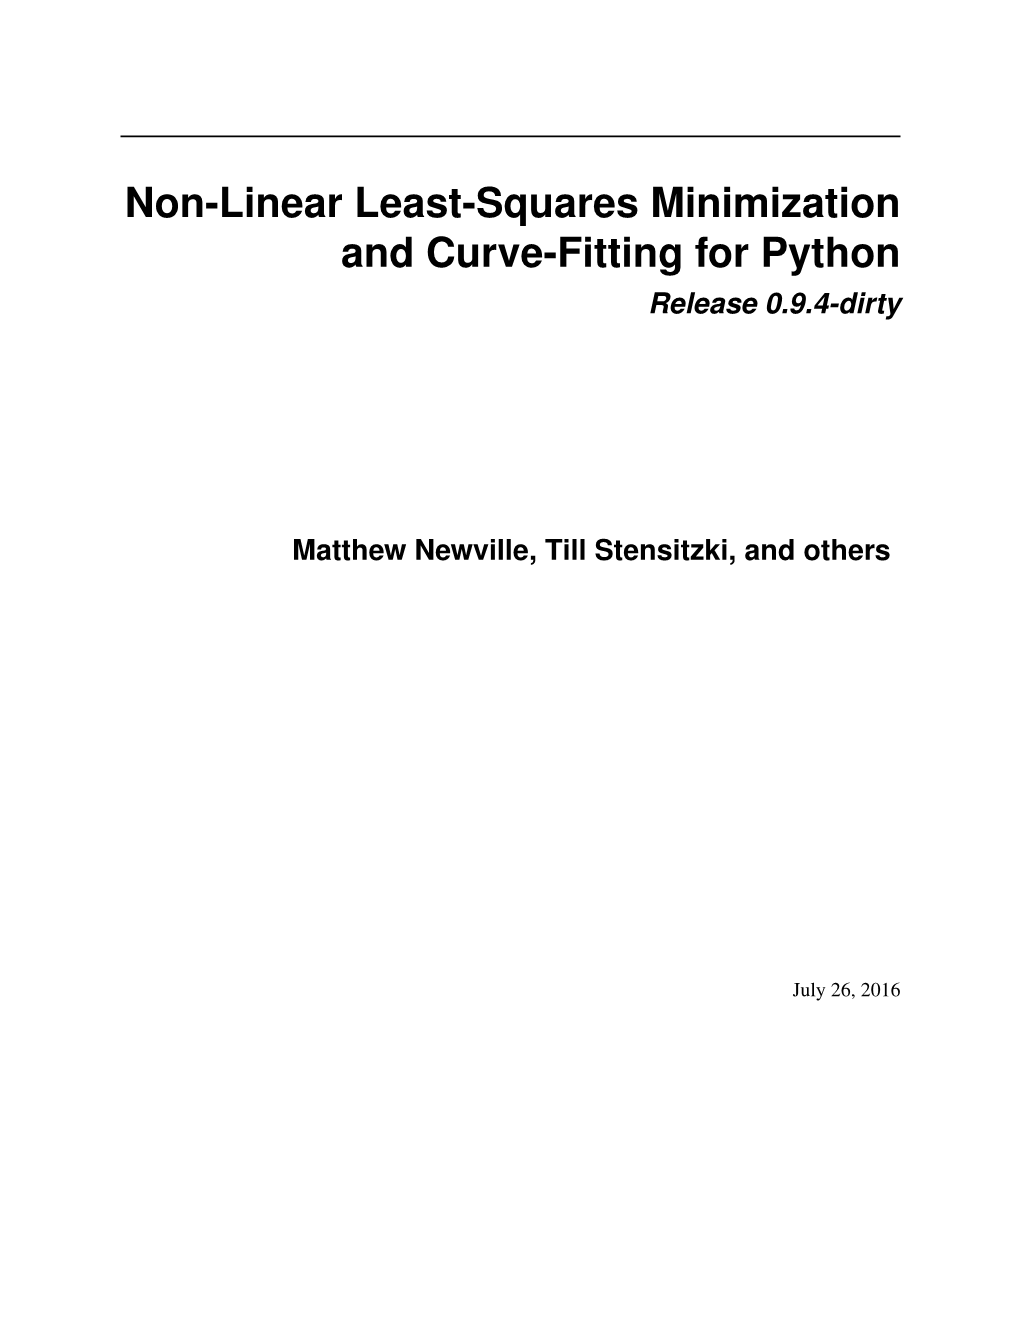 Non-Linear Least-Squares Minimization and Curve-Fitting for Python Release 0.9.4-Dirty